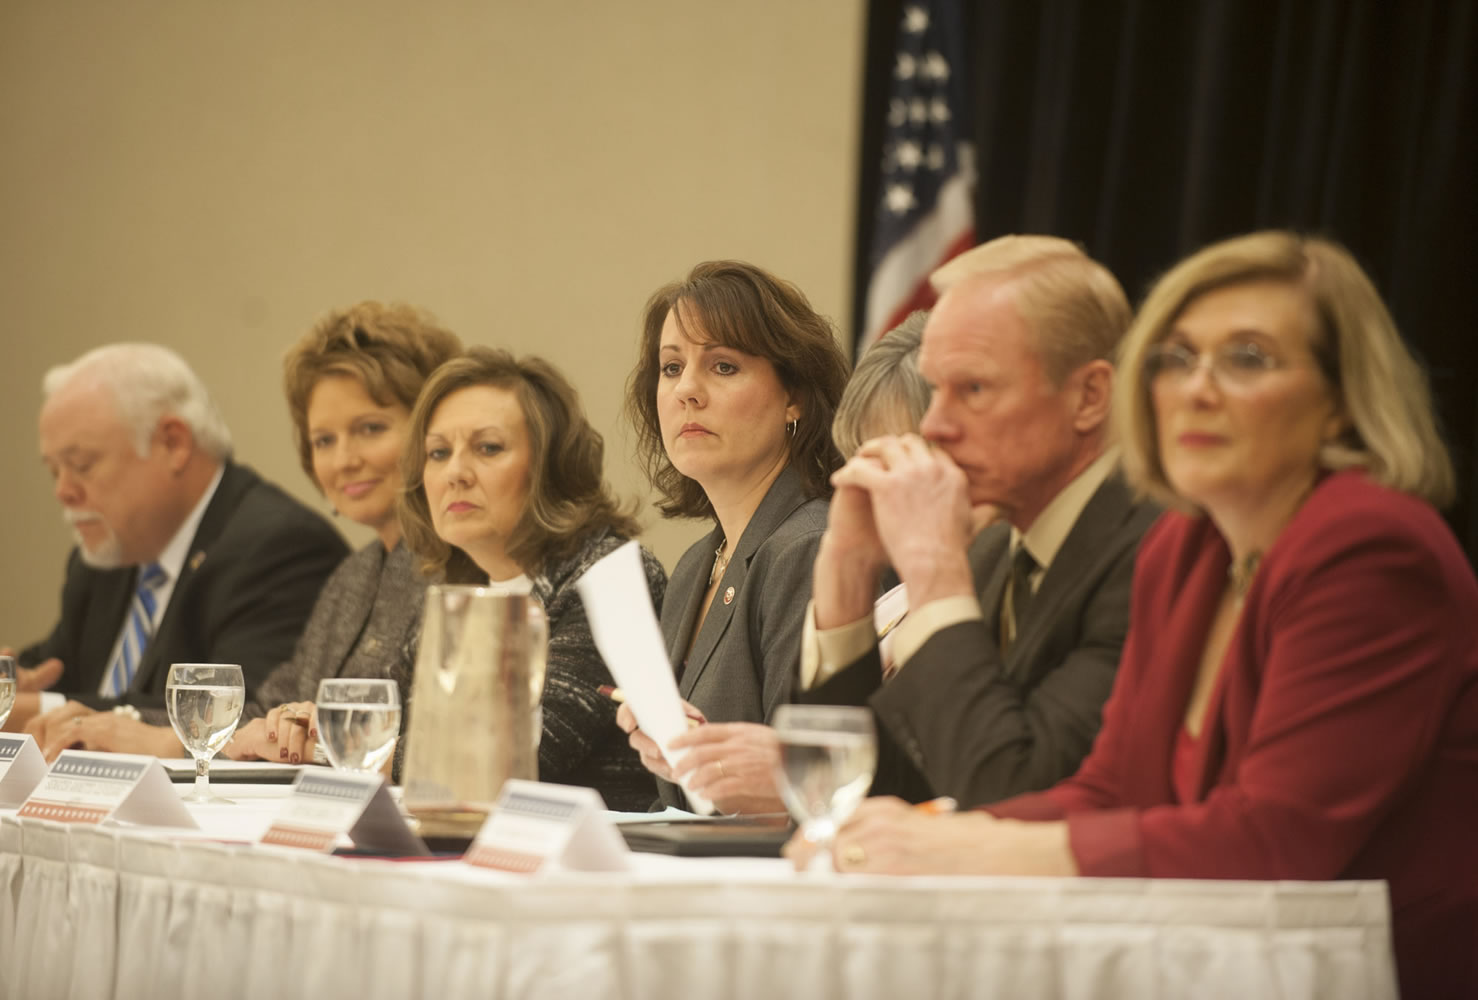 Lawmakers spoke on a panel Friday morning at the legislative outlook breakfast at the Hilton. From left to right, Sen. Don Benton, R-Vancouver, Rep. Liz Pike, R-Camas, Rep. Lynda Wilson, R-Vancouver, Sen. Ann Rivers, R-La Center, Sen. Annette Cleveland, D-Vancouver, Rep. Paul Harris, R-Vancouver, and Rep. Sharon Wylie, D-Vancouver.